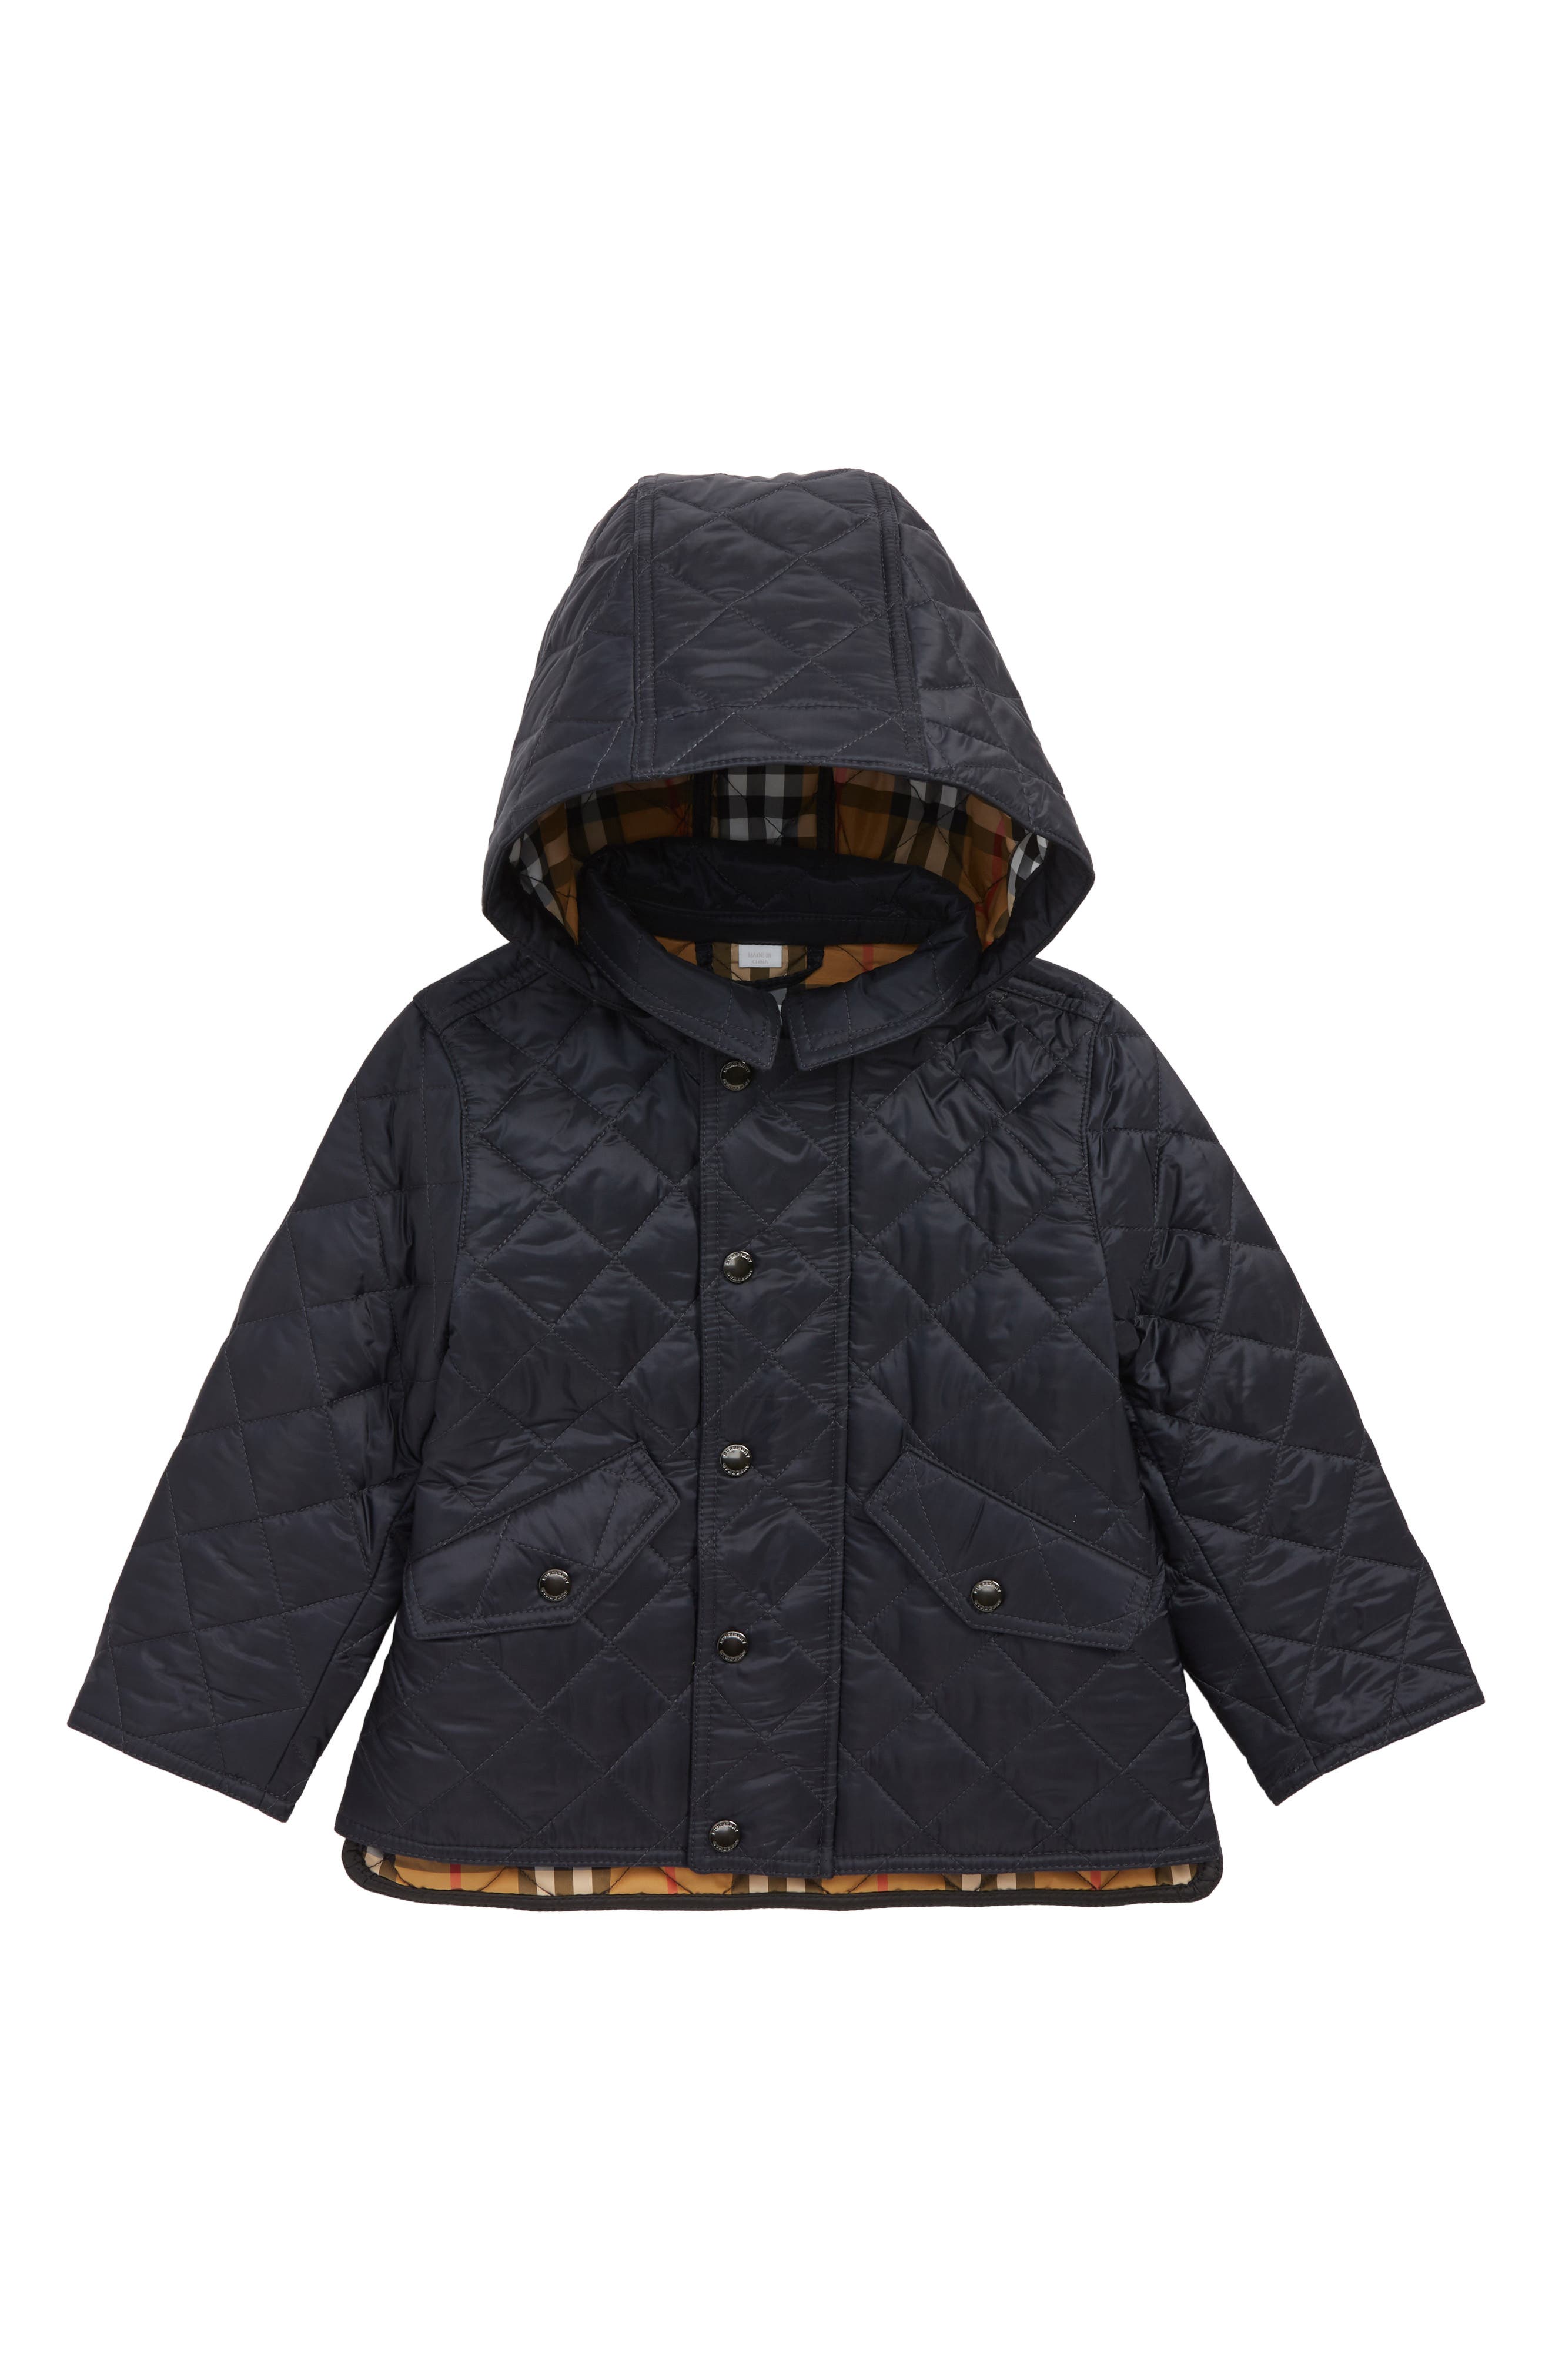 burberry jacket for baby boy